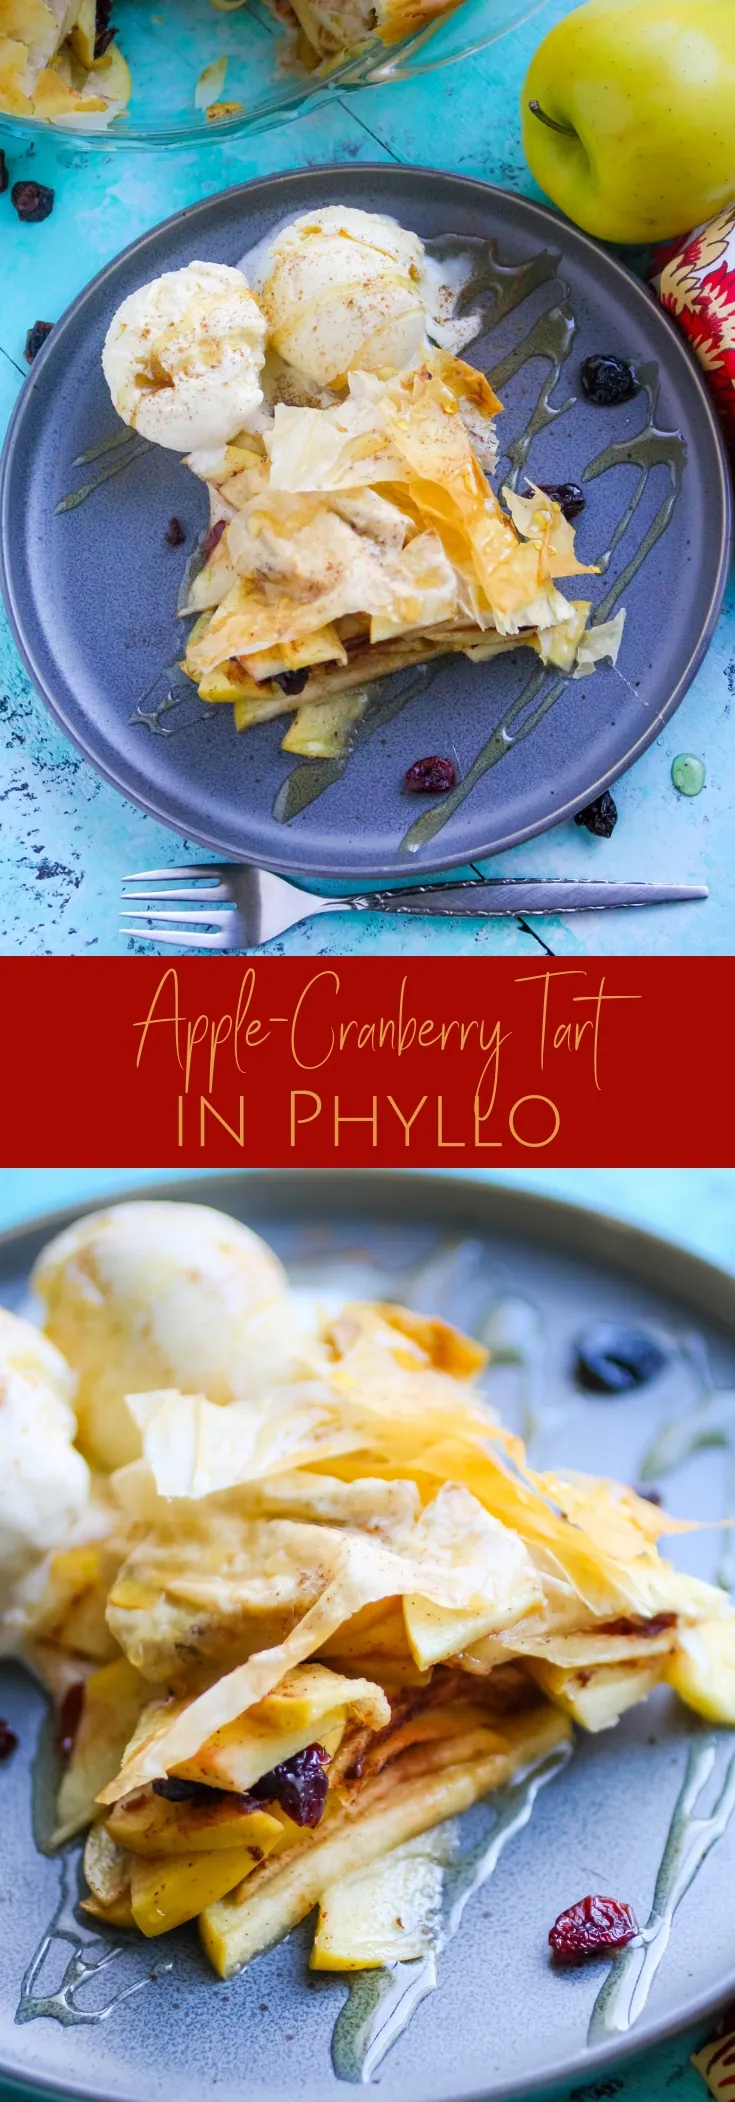 Apple-Cranberry Tart in Phyllo is a treat everyone will enjoy! Apple-Cranberry Tart in Phyllo is flaky and delicious!